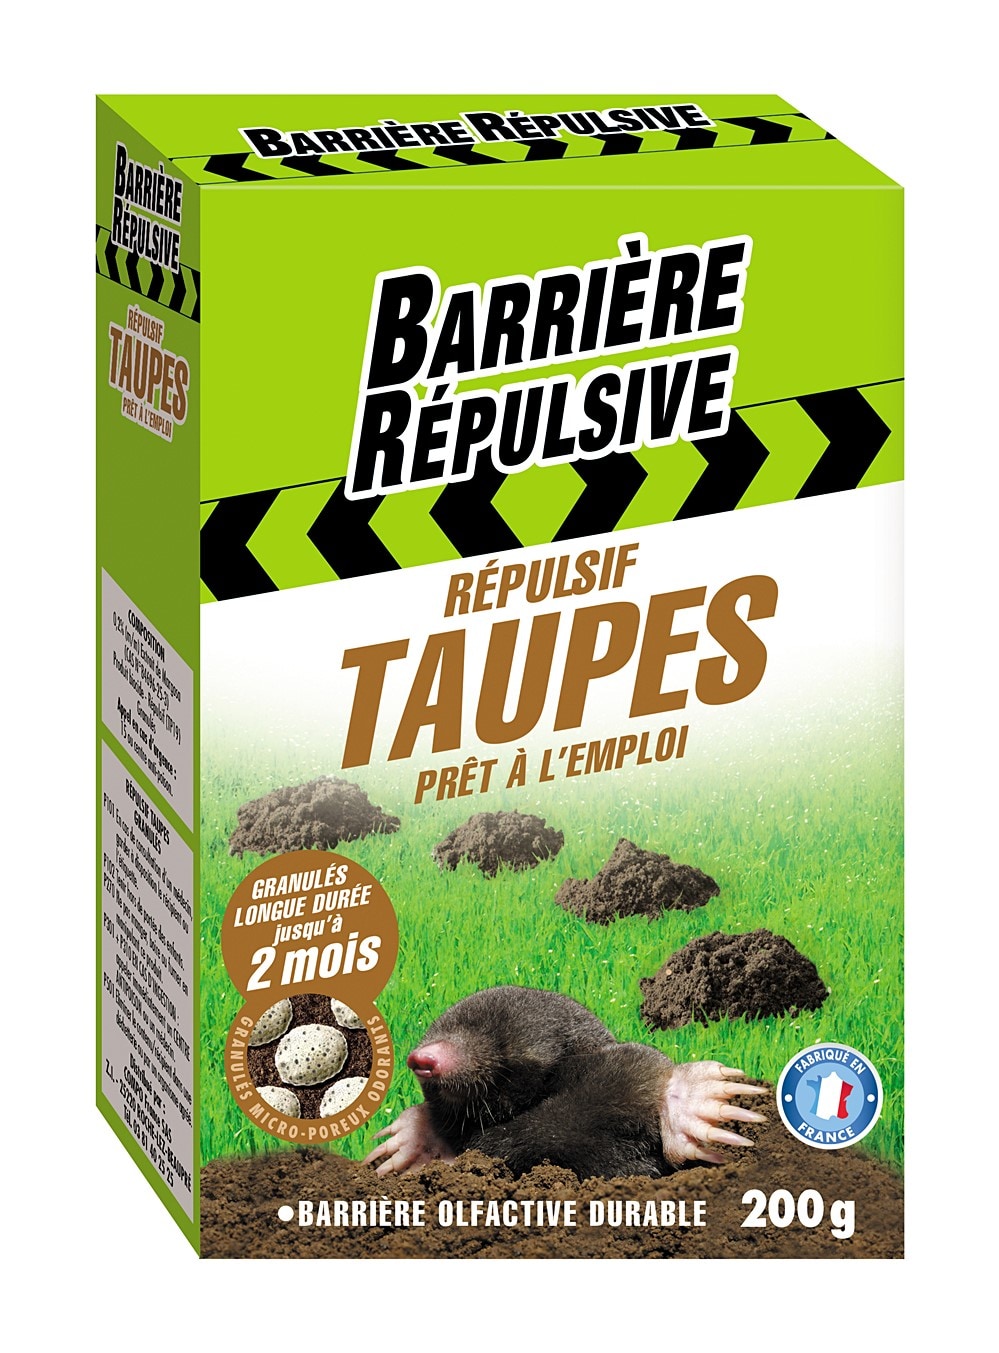 Anti-taupes à ultrasons couvre 300m2 - Mr.Bricolage